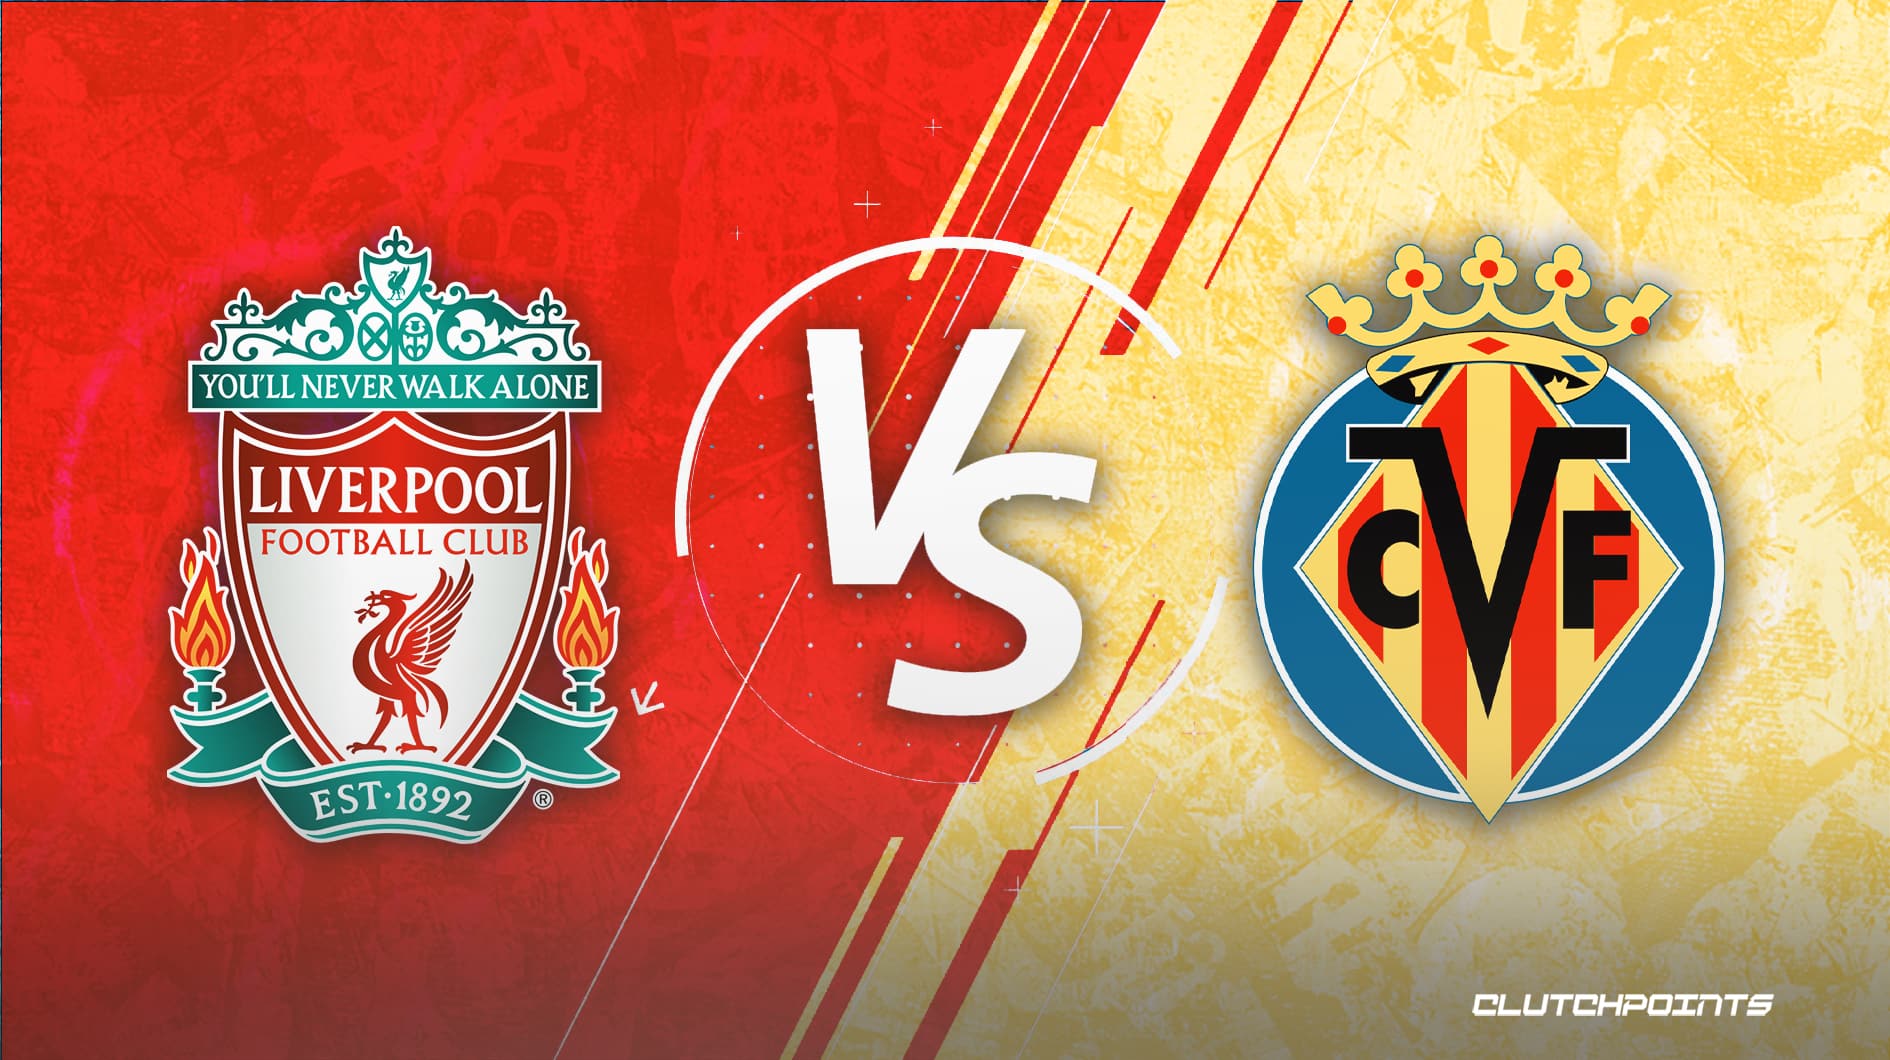 Liverpool - Villarreal prediction for the Champions League match